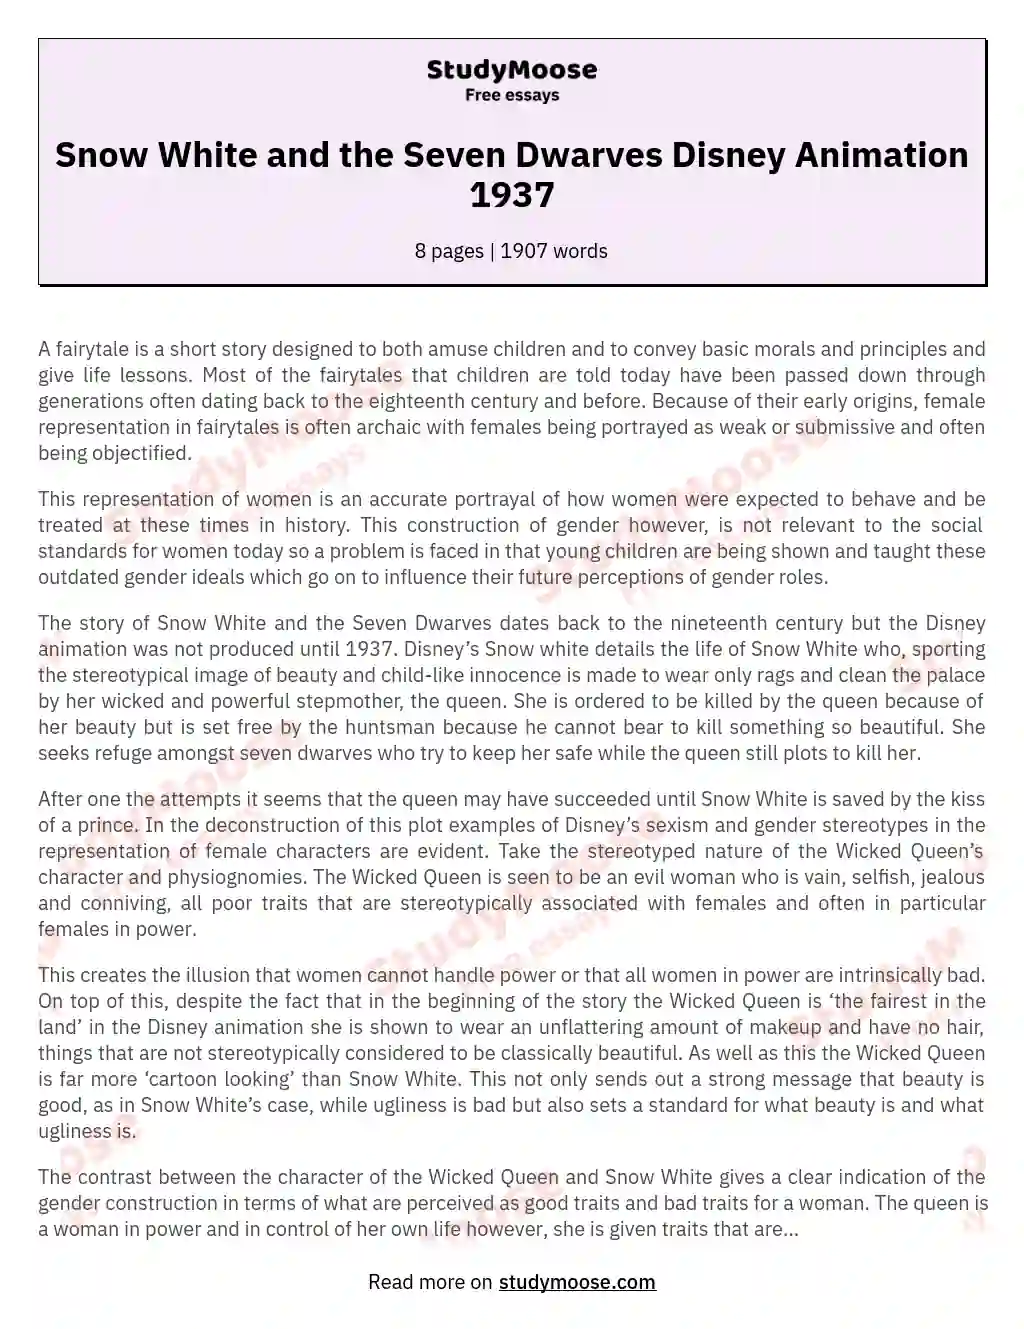 Snow White and the Seven Dwarves Disney Animation 1937 essay